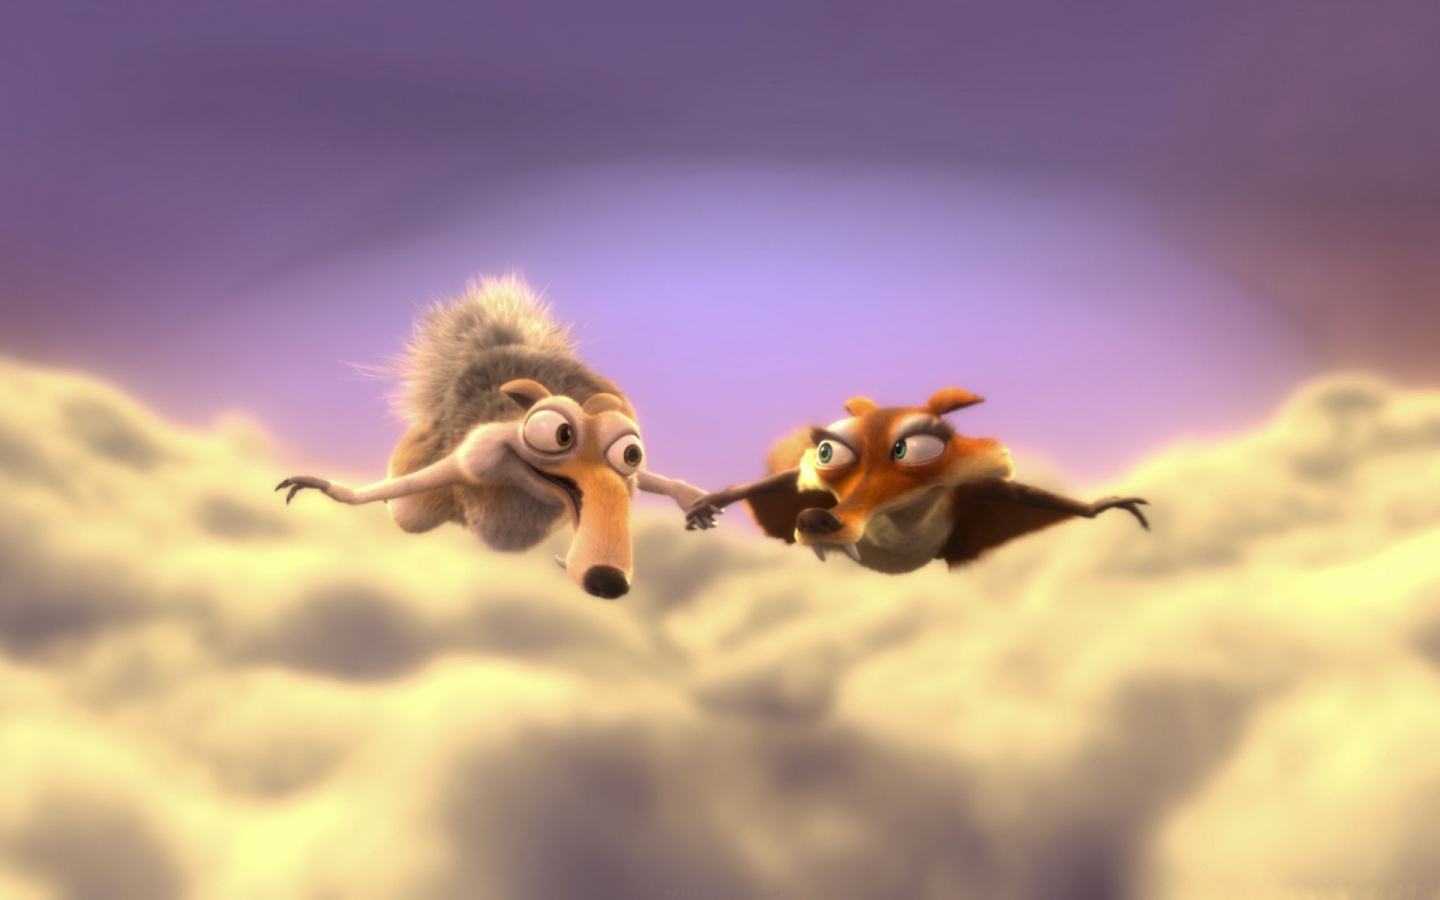 Scrat and Scratte for 1440 x 900 widescreen resolution